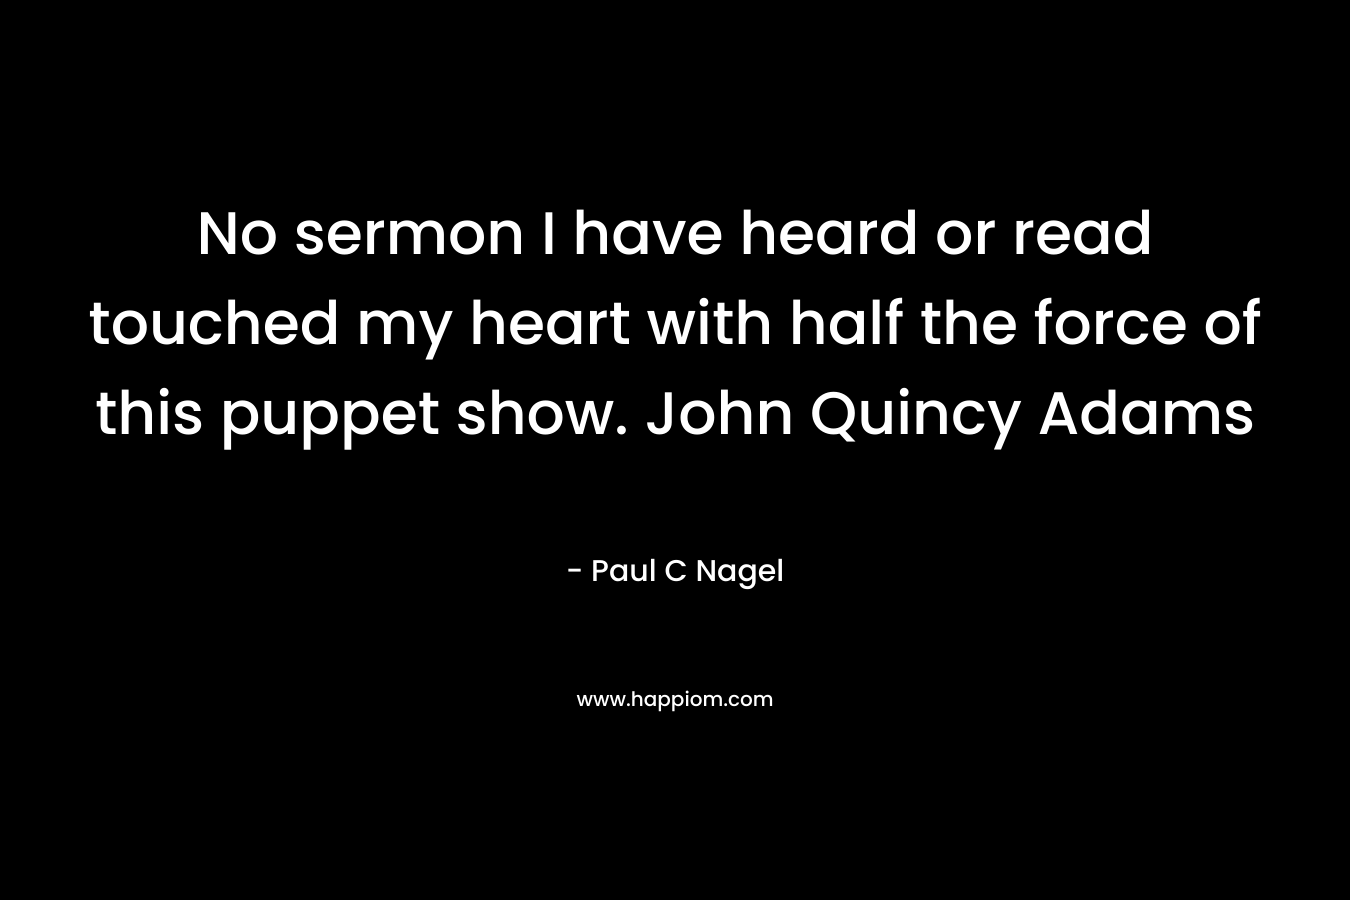 No sermon I have heard or read touched my heart with half the force of this puppet show. John Quincy Adams